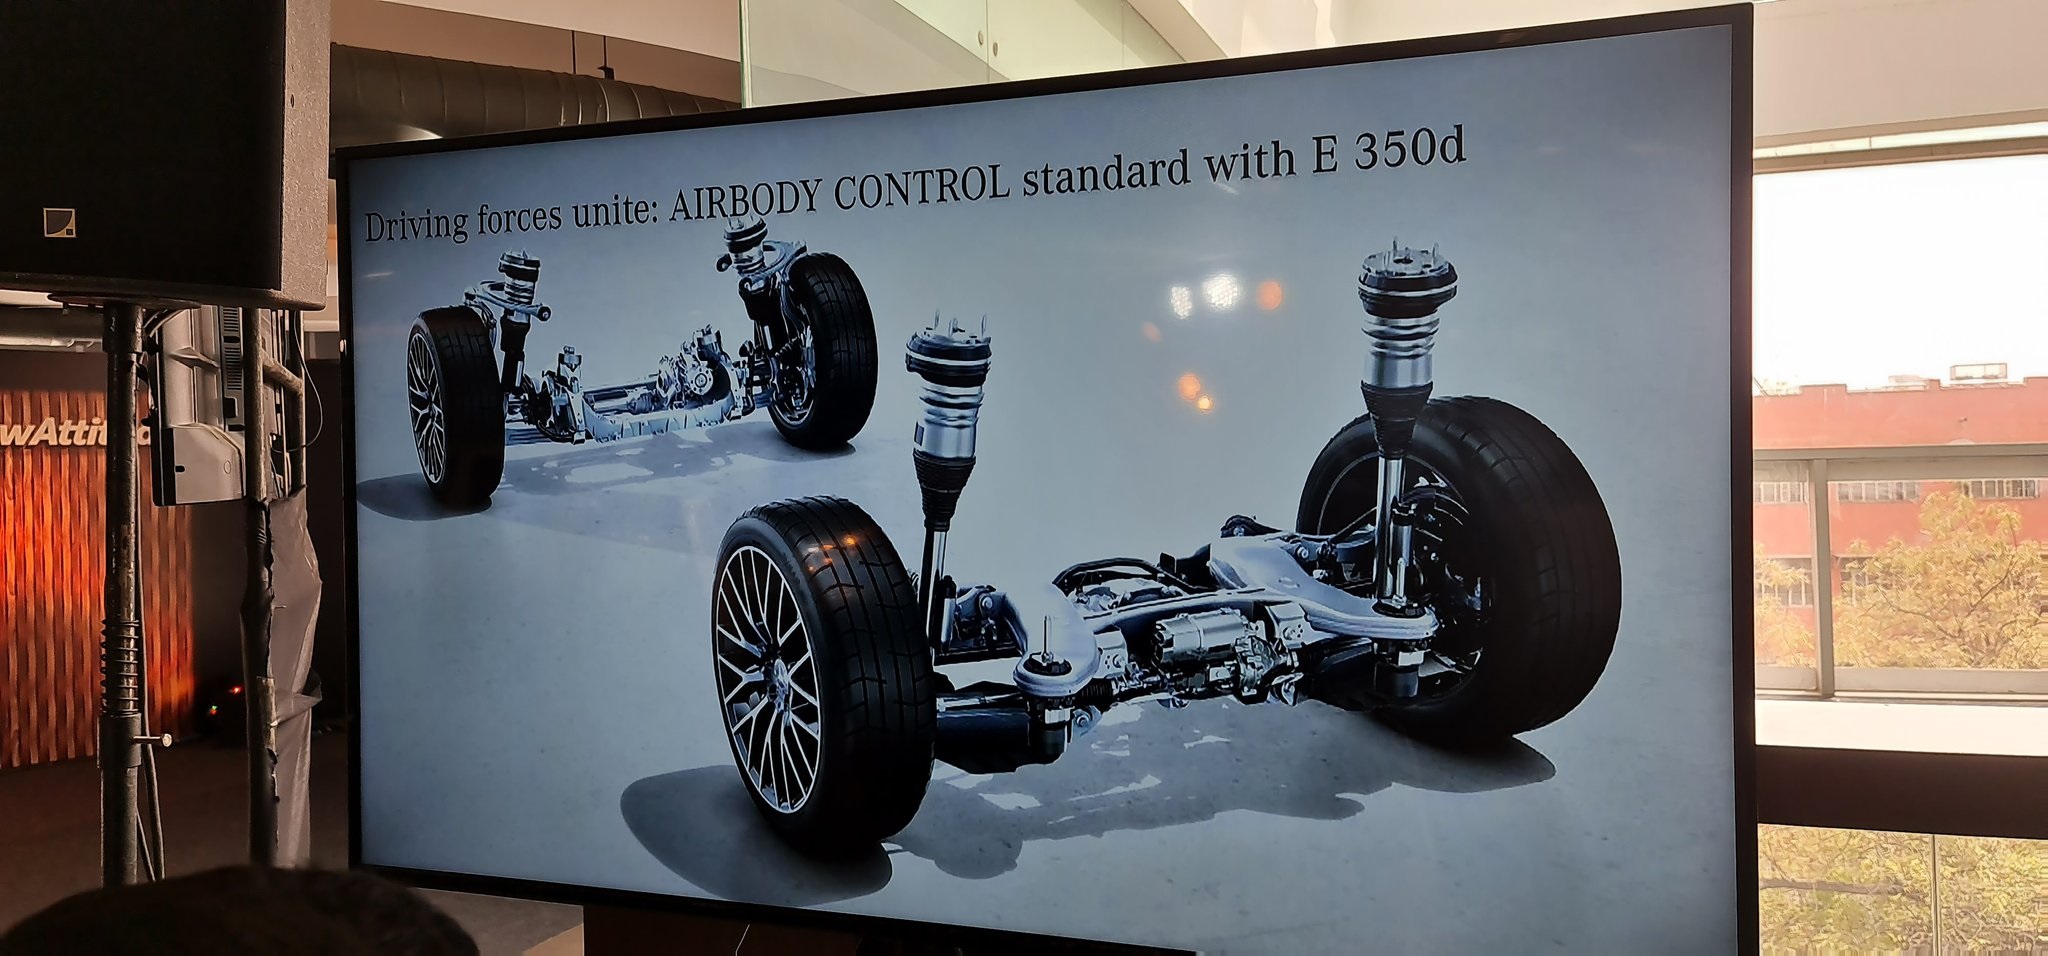 <p>And now Airbody Control comes as standard fitment on the E350d.</p>